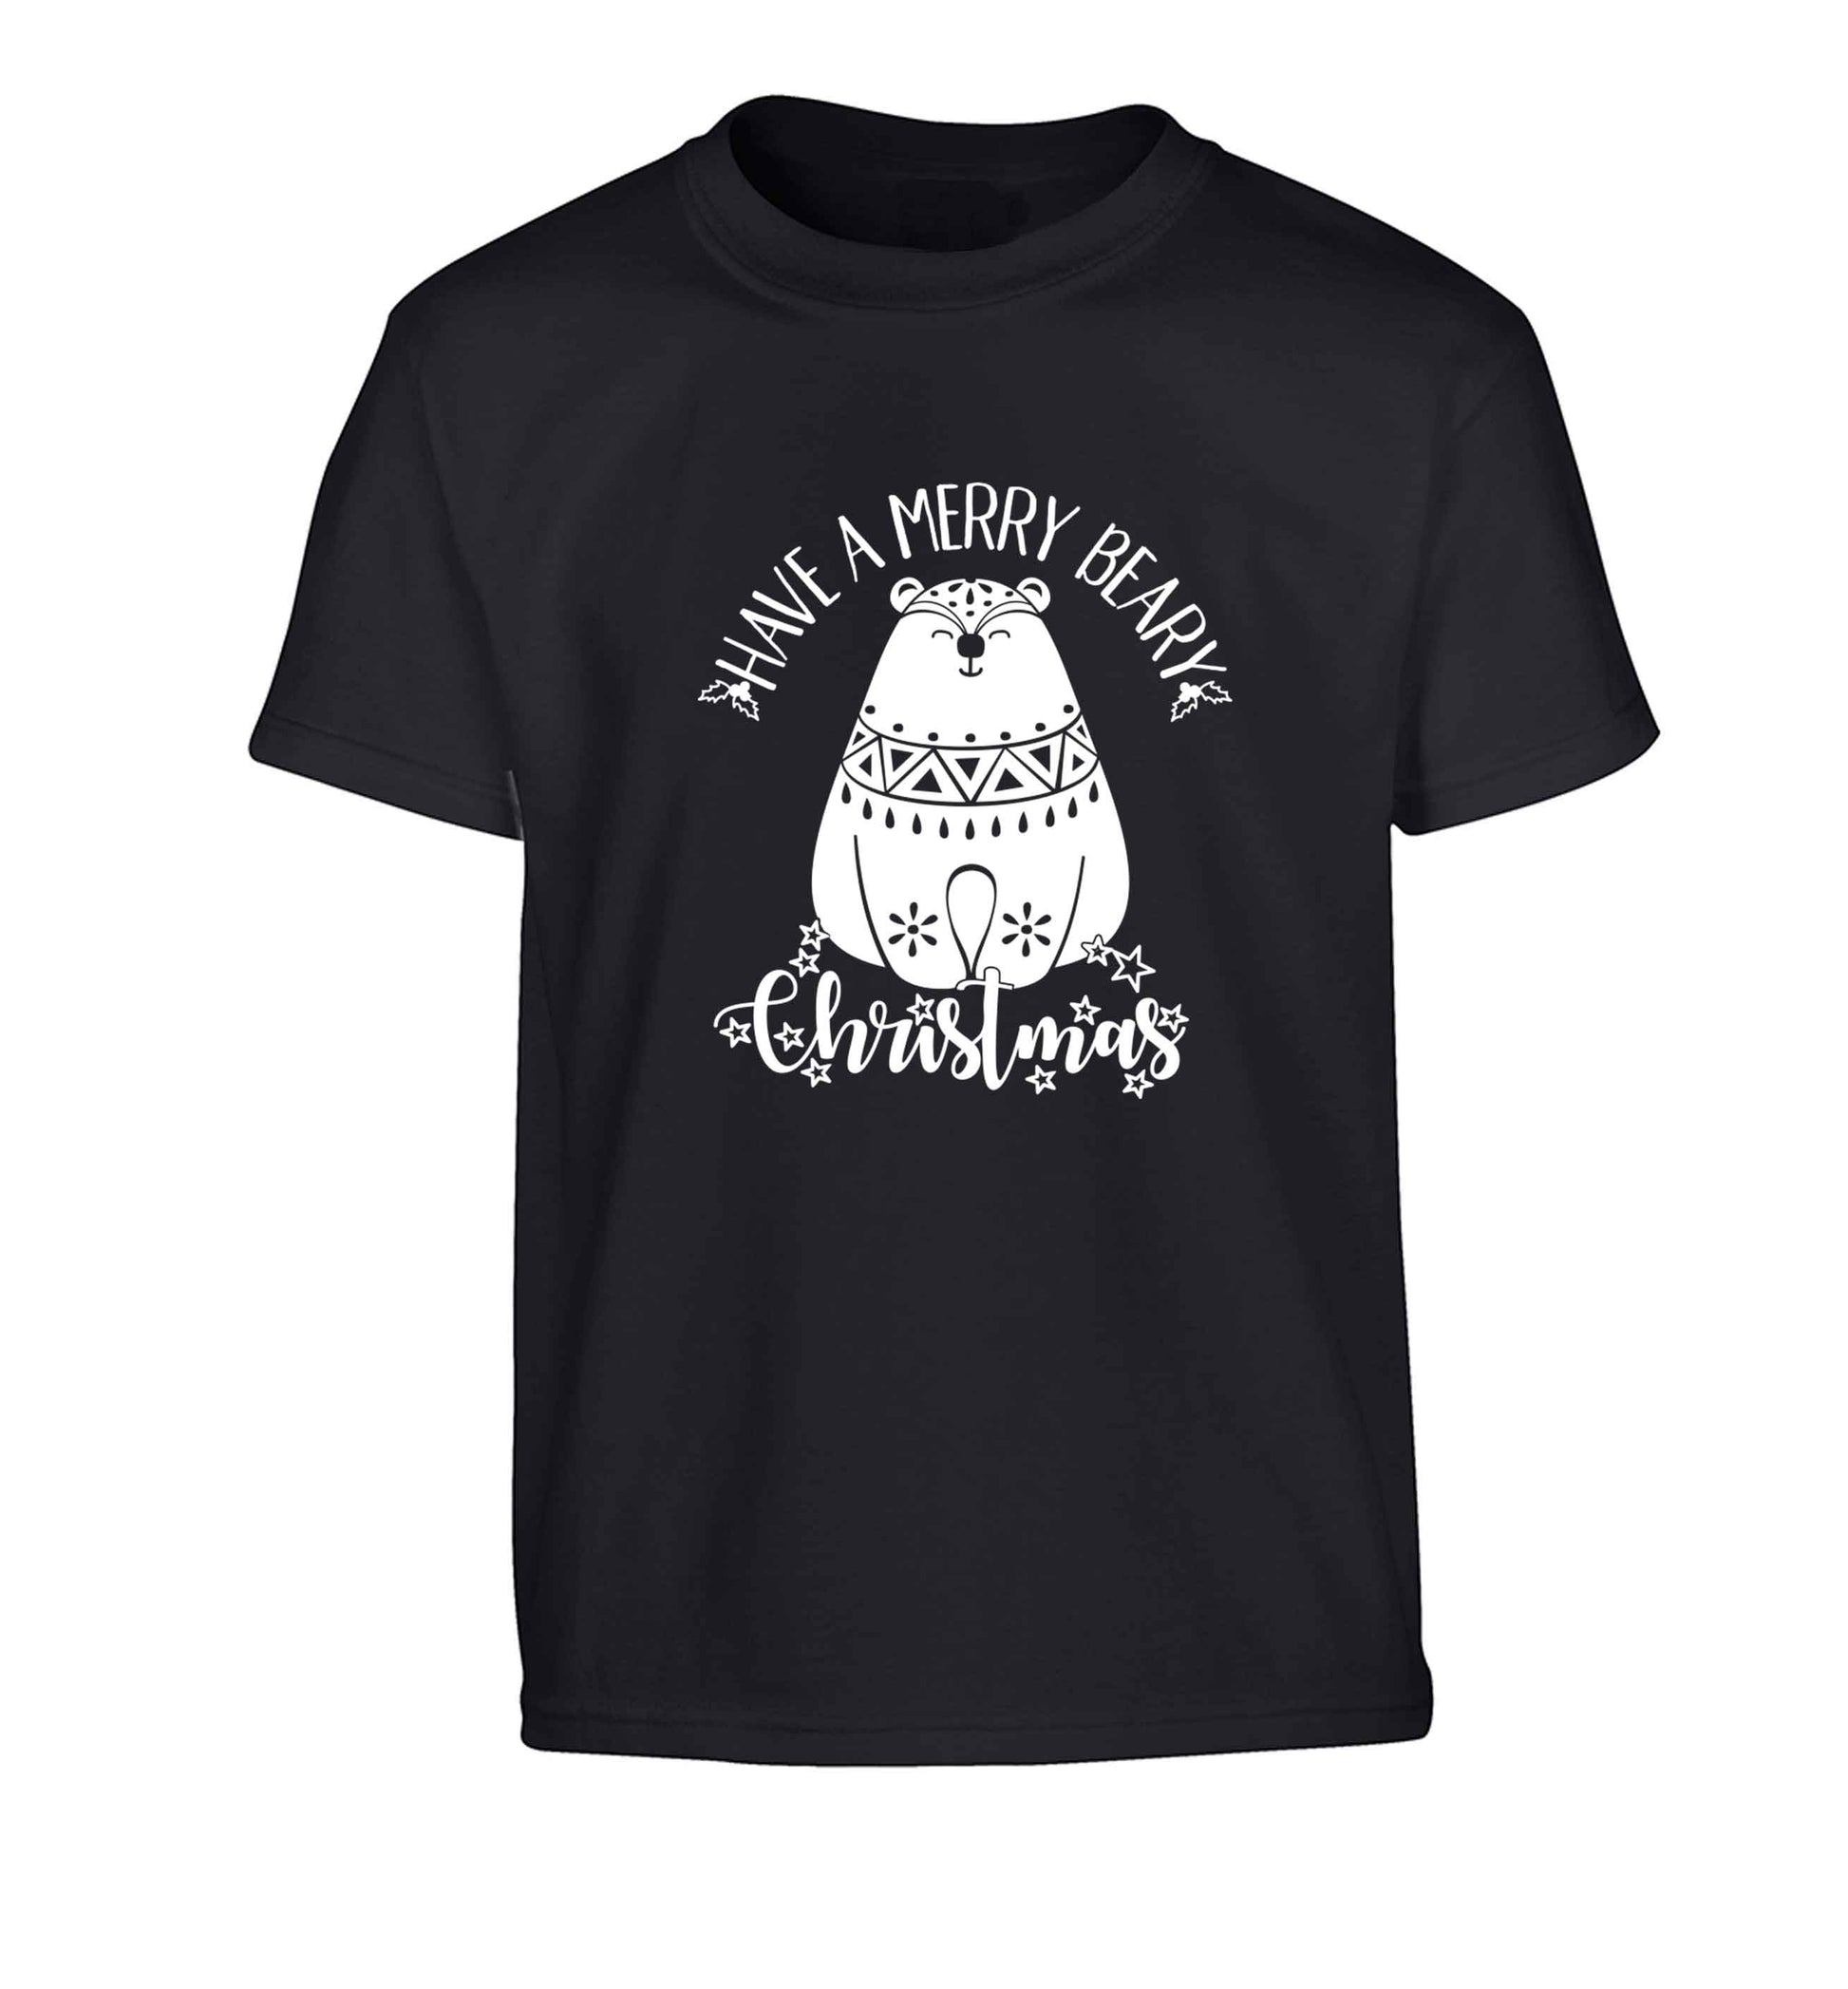 Have a merry beary Christmas Children's black Tshirt 12-13 Years